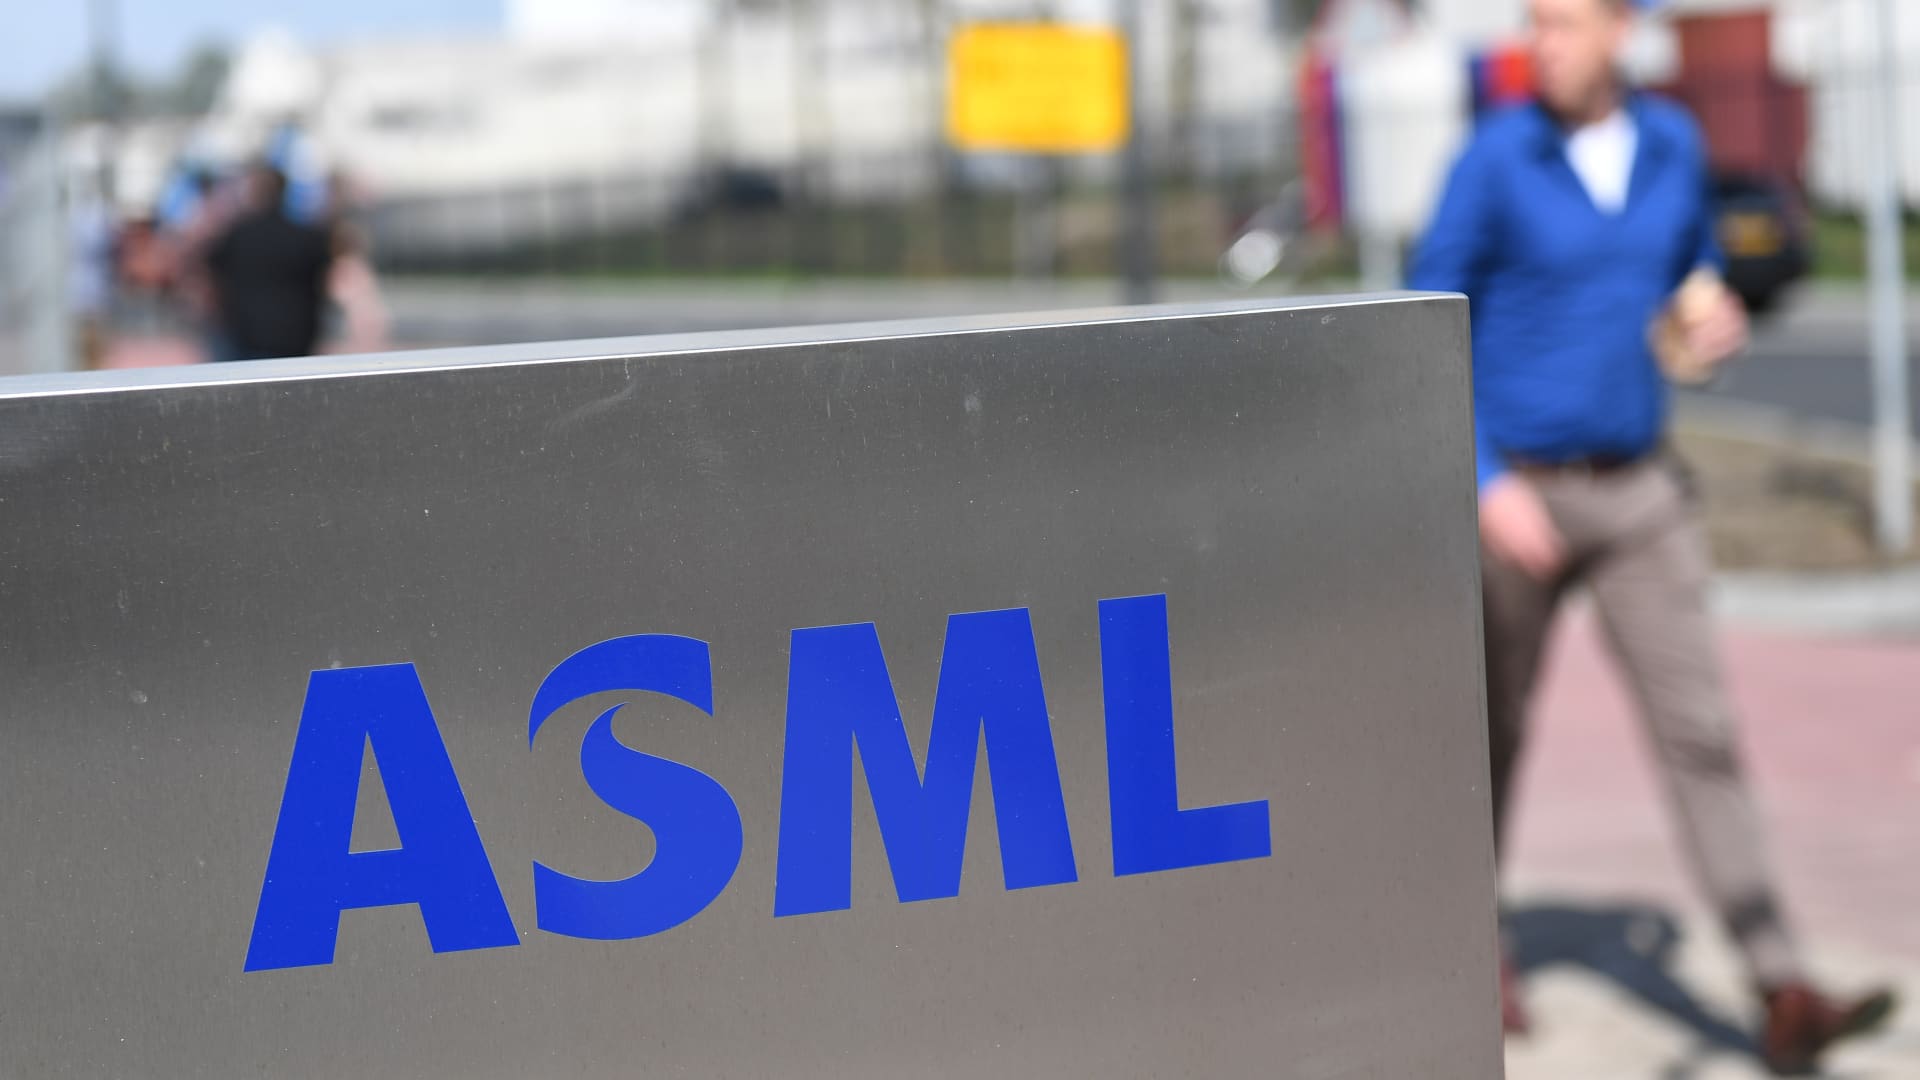 President Joe Biden's administration plans to press the Netherlands next week to stop its top chipmaking equipment maker ASML from servicing some tools in China, two people familiar with the matter said, as the U.S. leans on allies in its bid to hobble Beijing's tech sector.